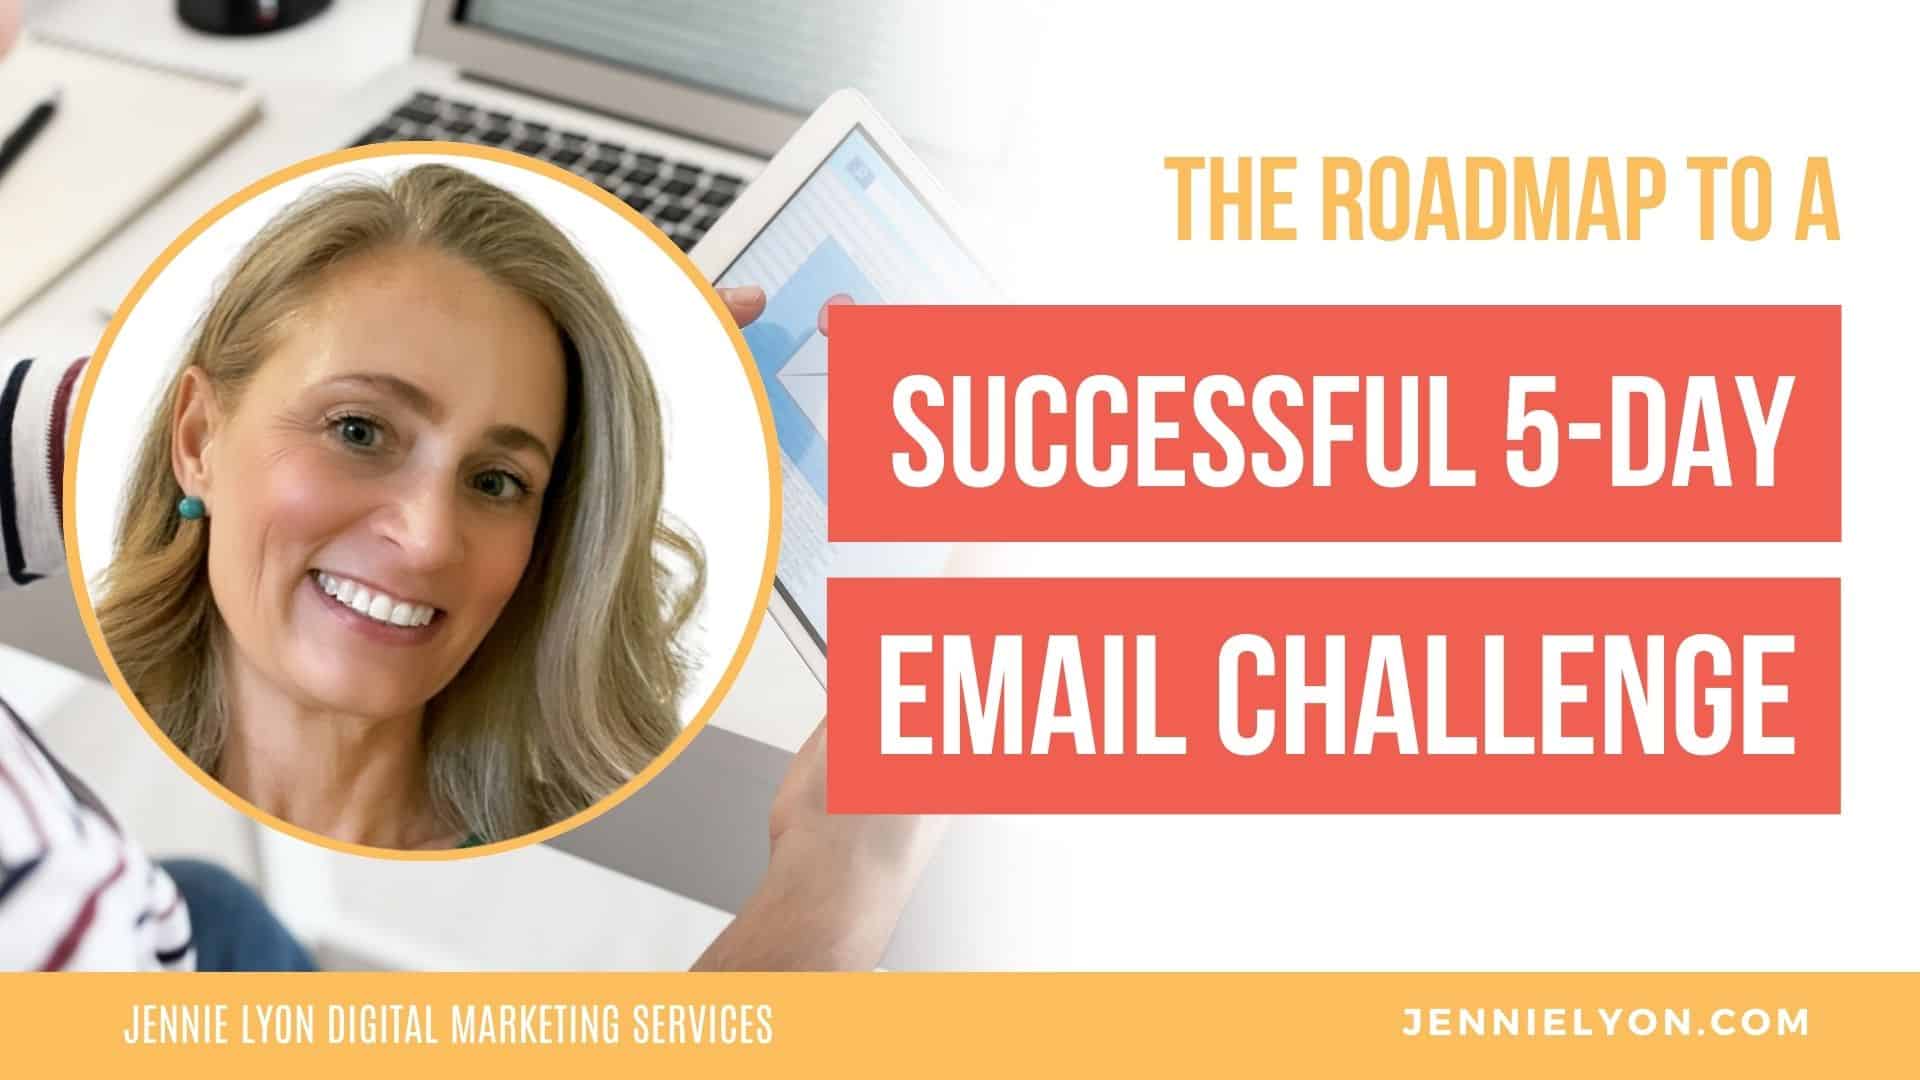 The Roadmap to a Successful 5-Day Email Challenge